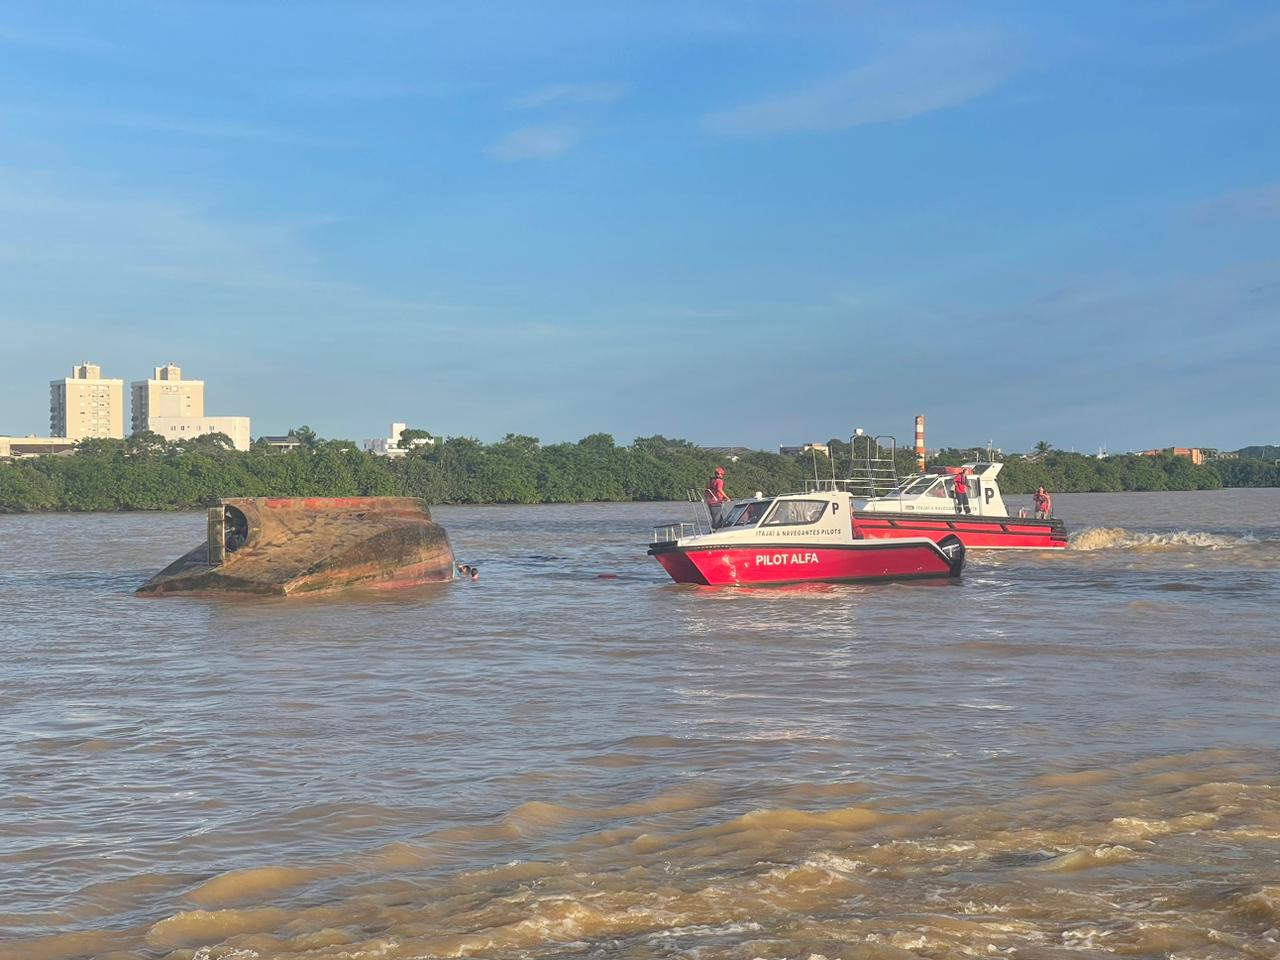 Pilot boats helped in the rescue - Internet/Reproduction/ND